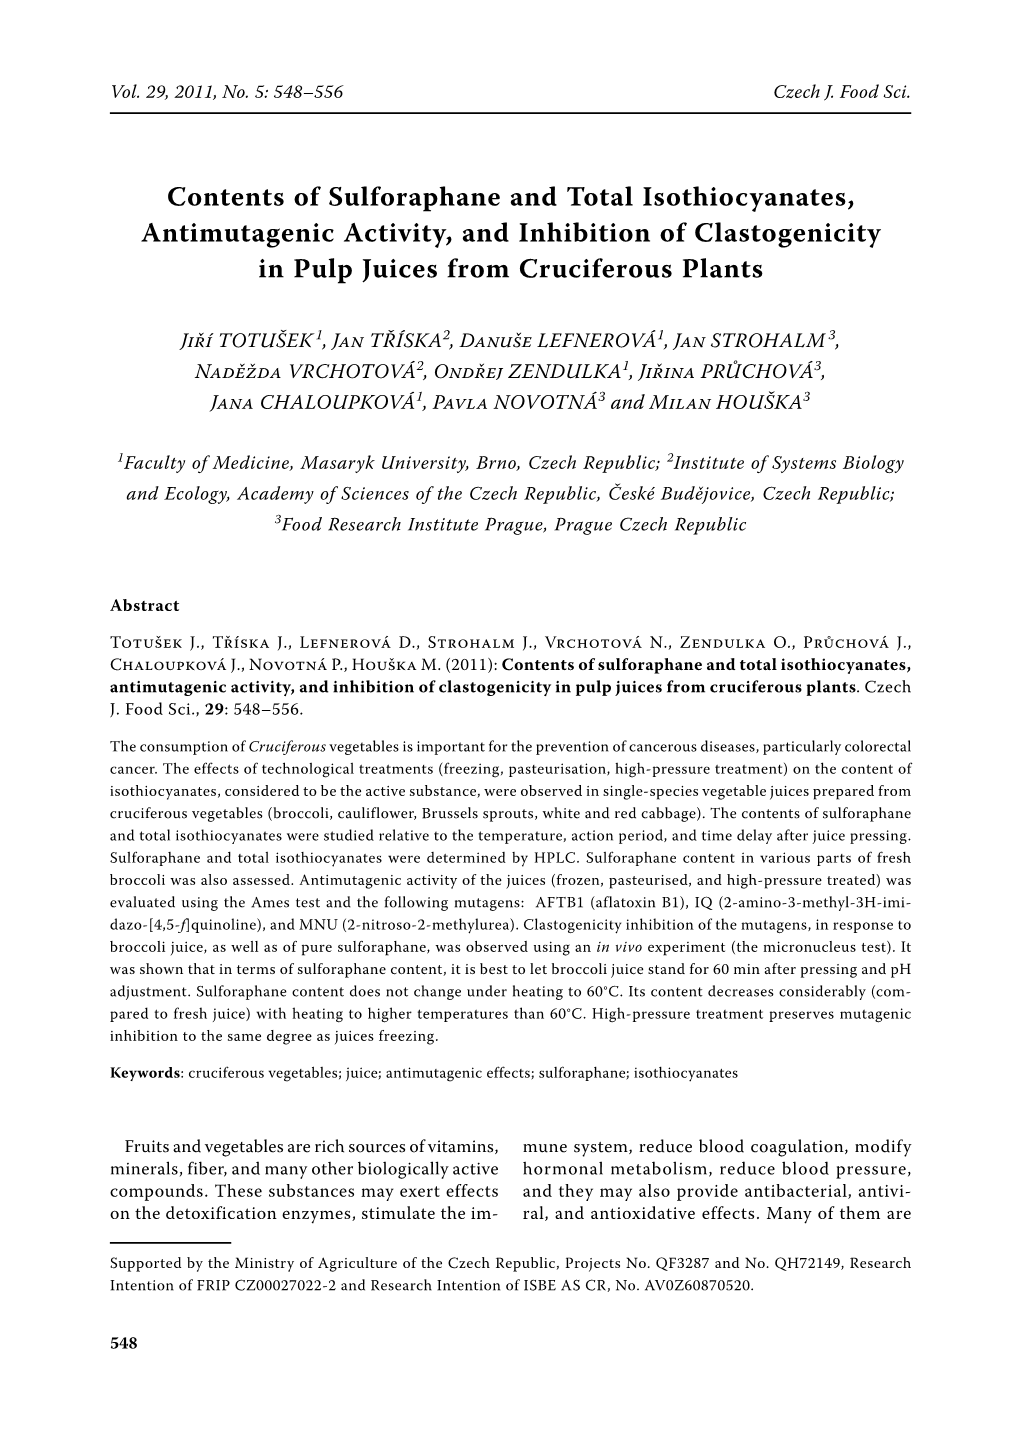 Contents of Sulforaphane and Total Isothiocyanates, Antimutagenic Activity, and Inhibition of Clastogenicity in Pulp Juices from Cruciferous Plants